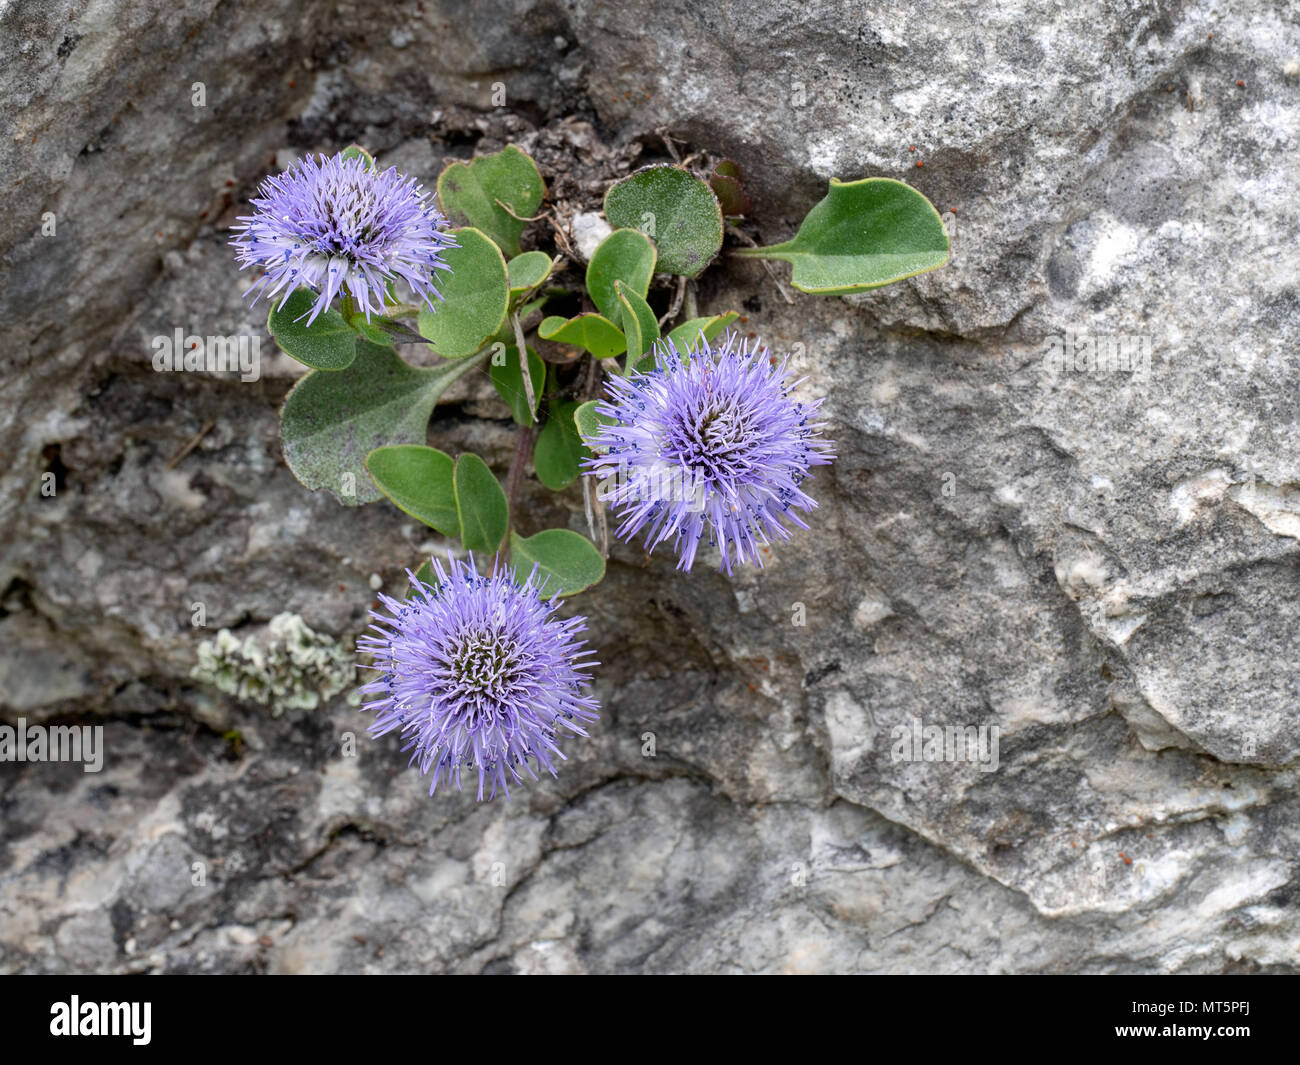 Globulari incanescens, growing wild on rocky crags in the Apuan Alps, Italy. Stock Photo